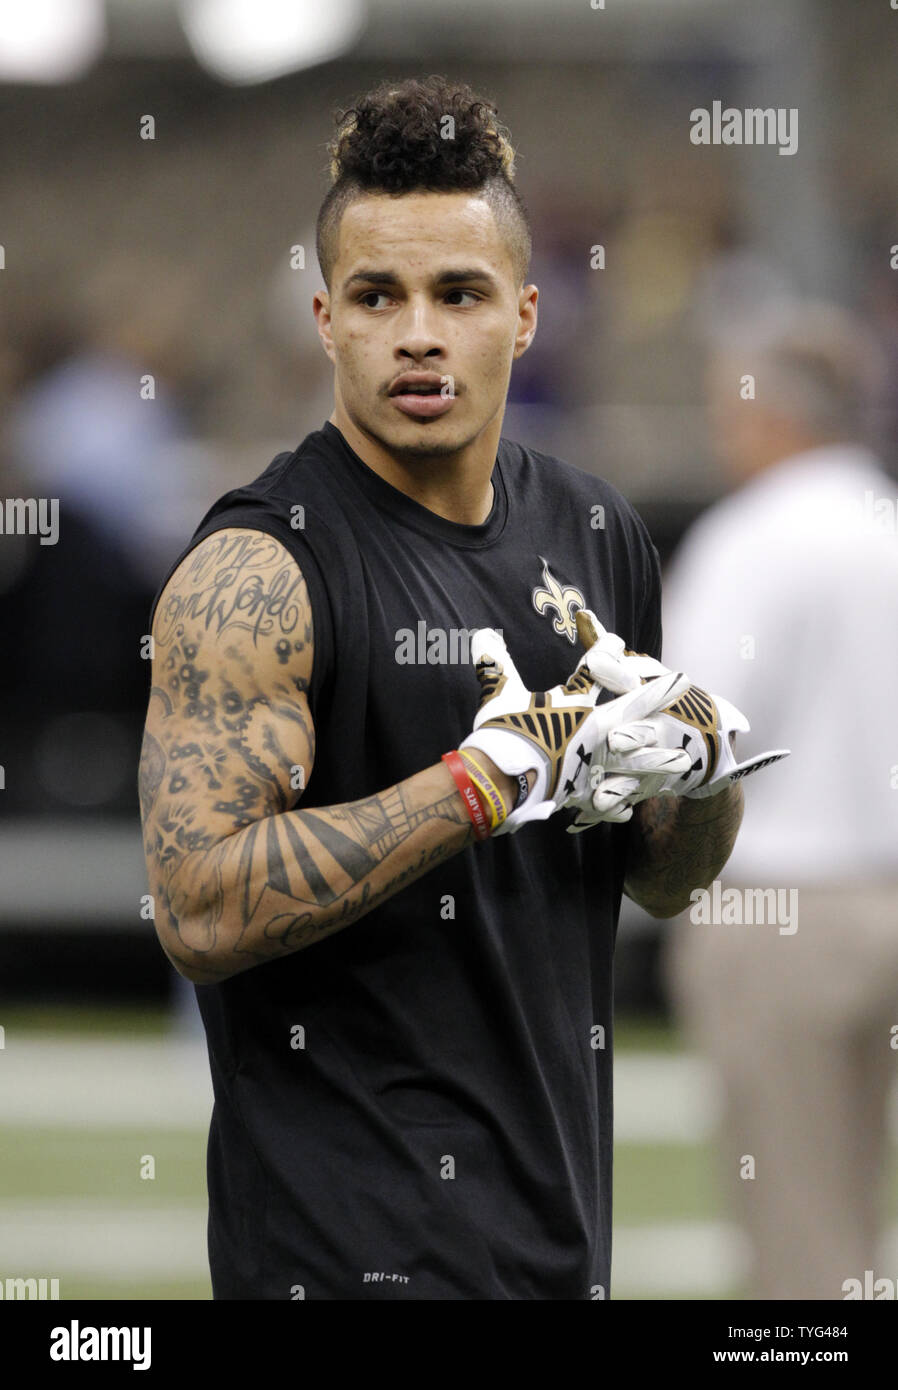 New Orleans Saints wide receiver Kenny Stills warms up before the start of  the Monday night game against the Baltimore Ravens at the Mercedes-Benz  Superdome in New Orleans November 24, 2014. UPI/A.J.